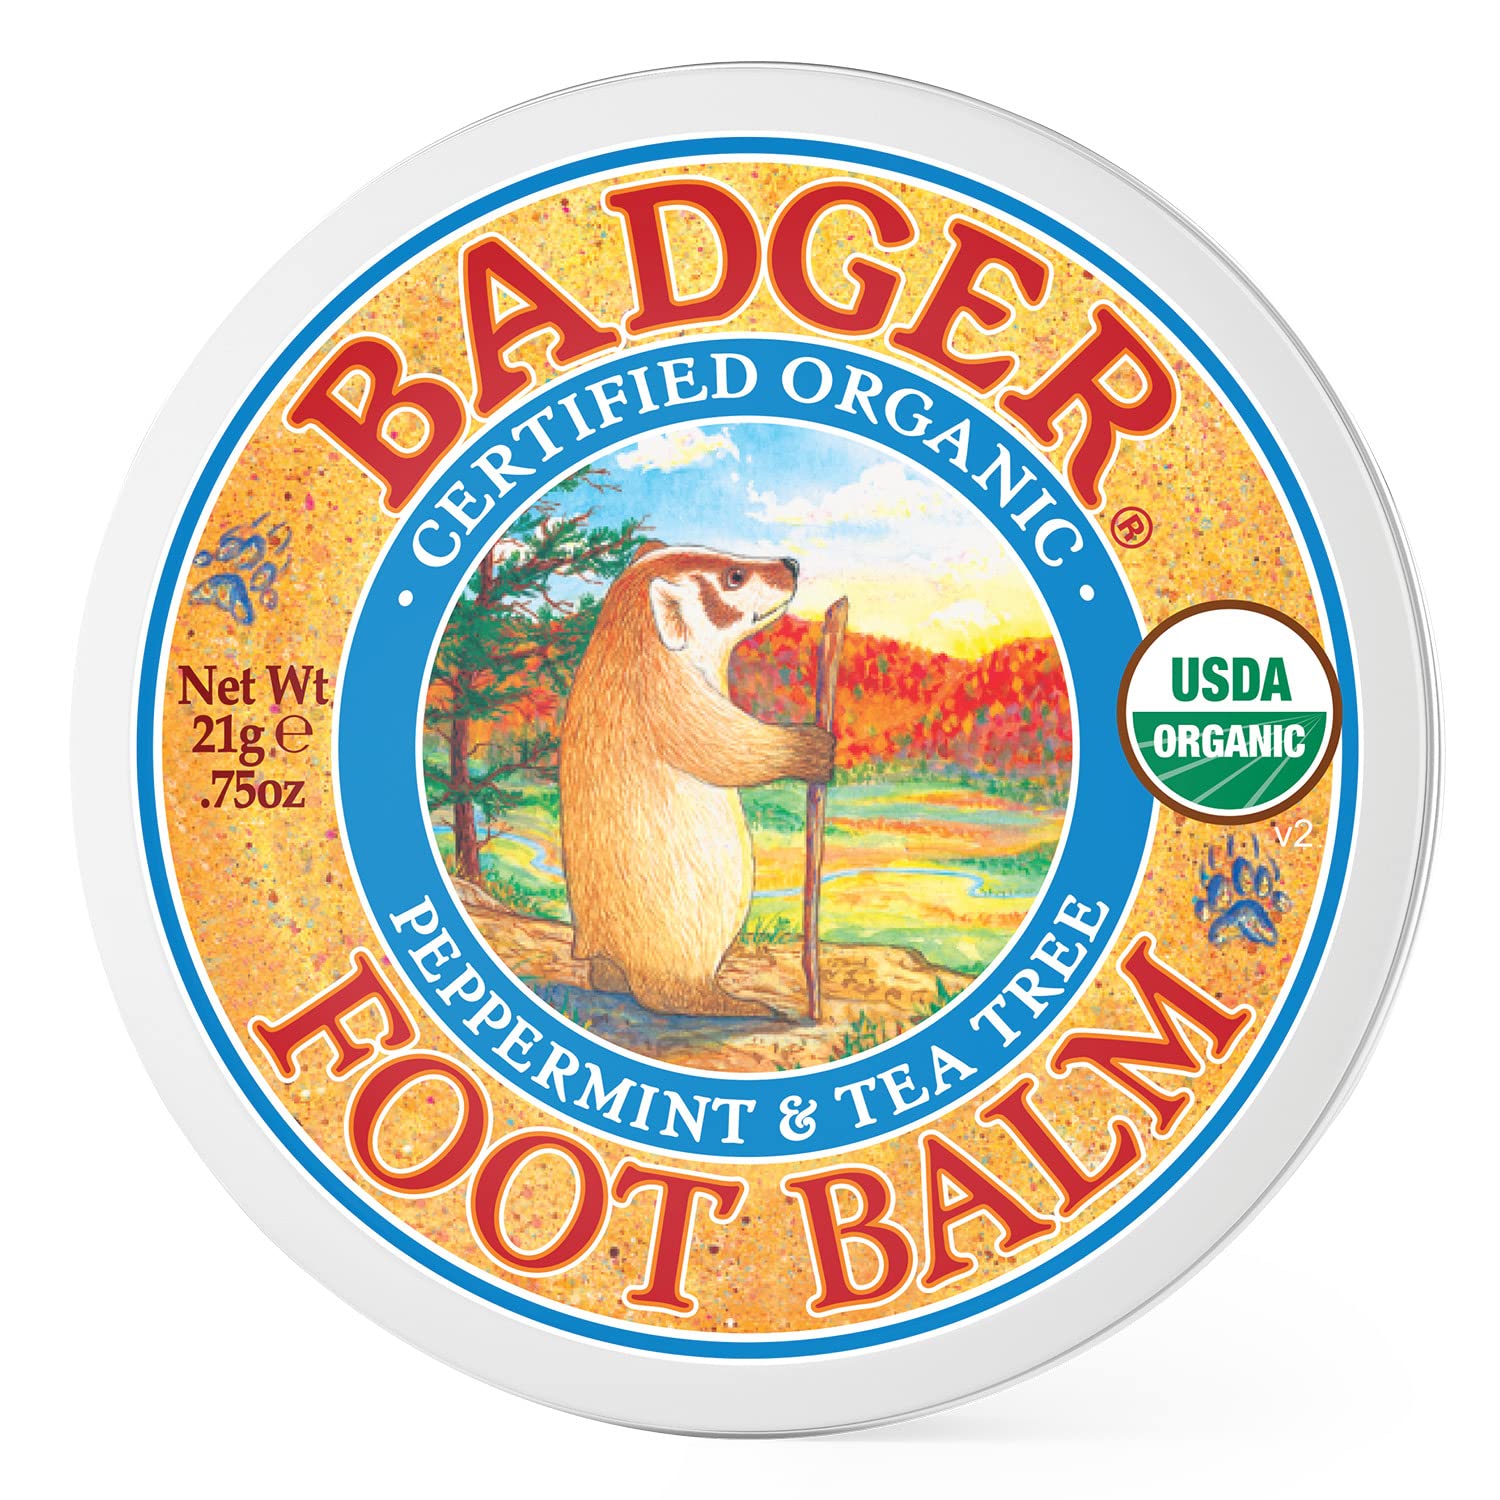 Badger - Foot Balm, Peppermint & Tea Tree, Heel Balm for Dry Cracked Feet, Certified Organic, Foot Balm with Essential Oils, Extra Virgin Olive and Jojoba Oils, 0.75 oz